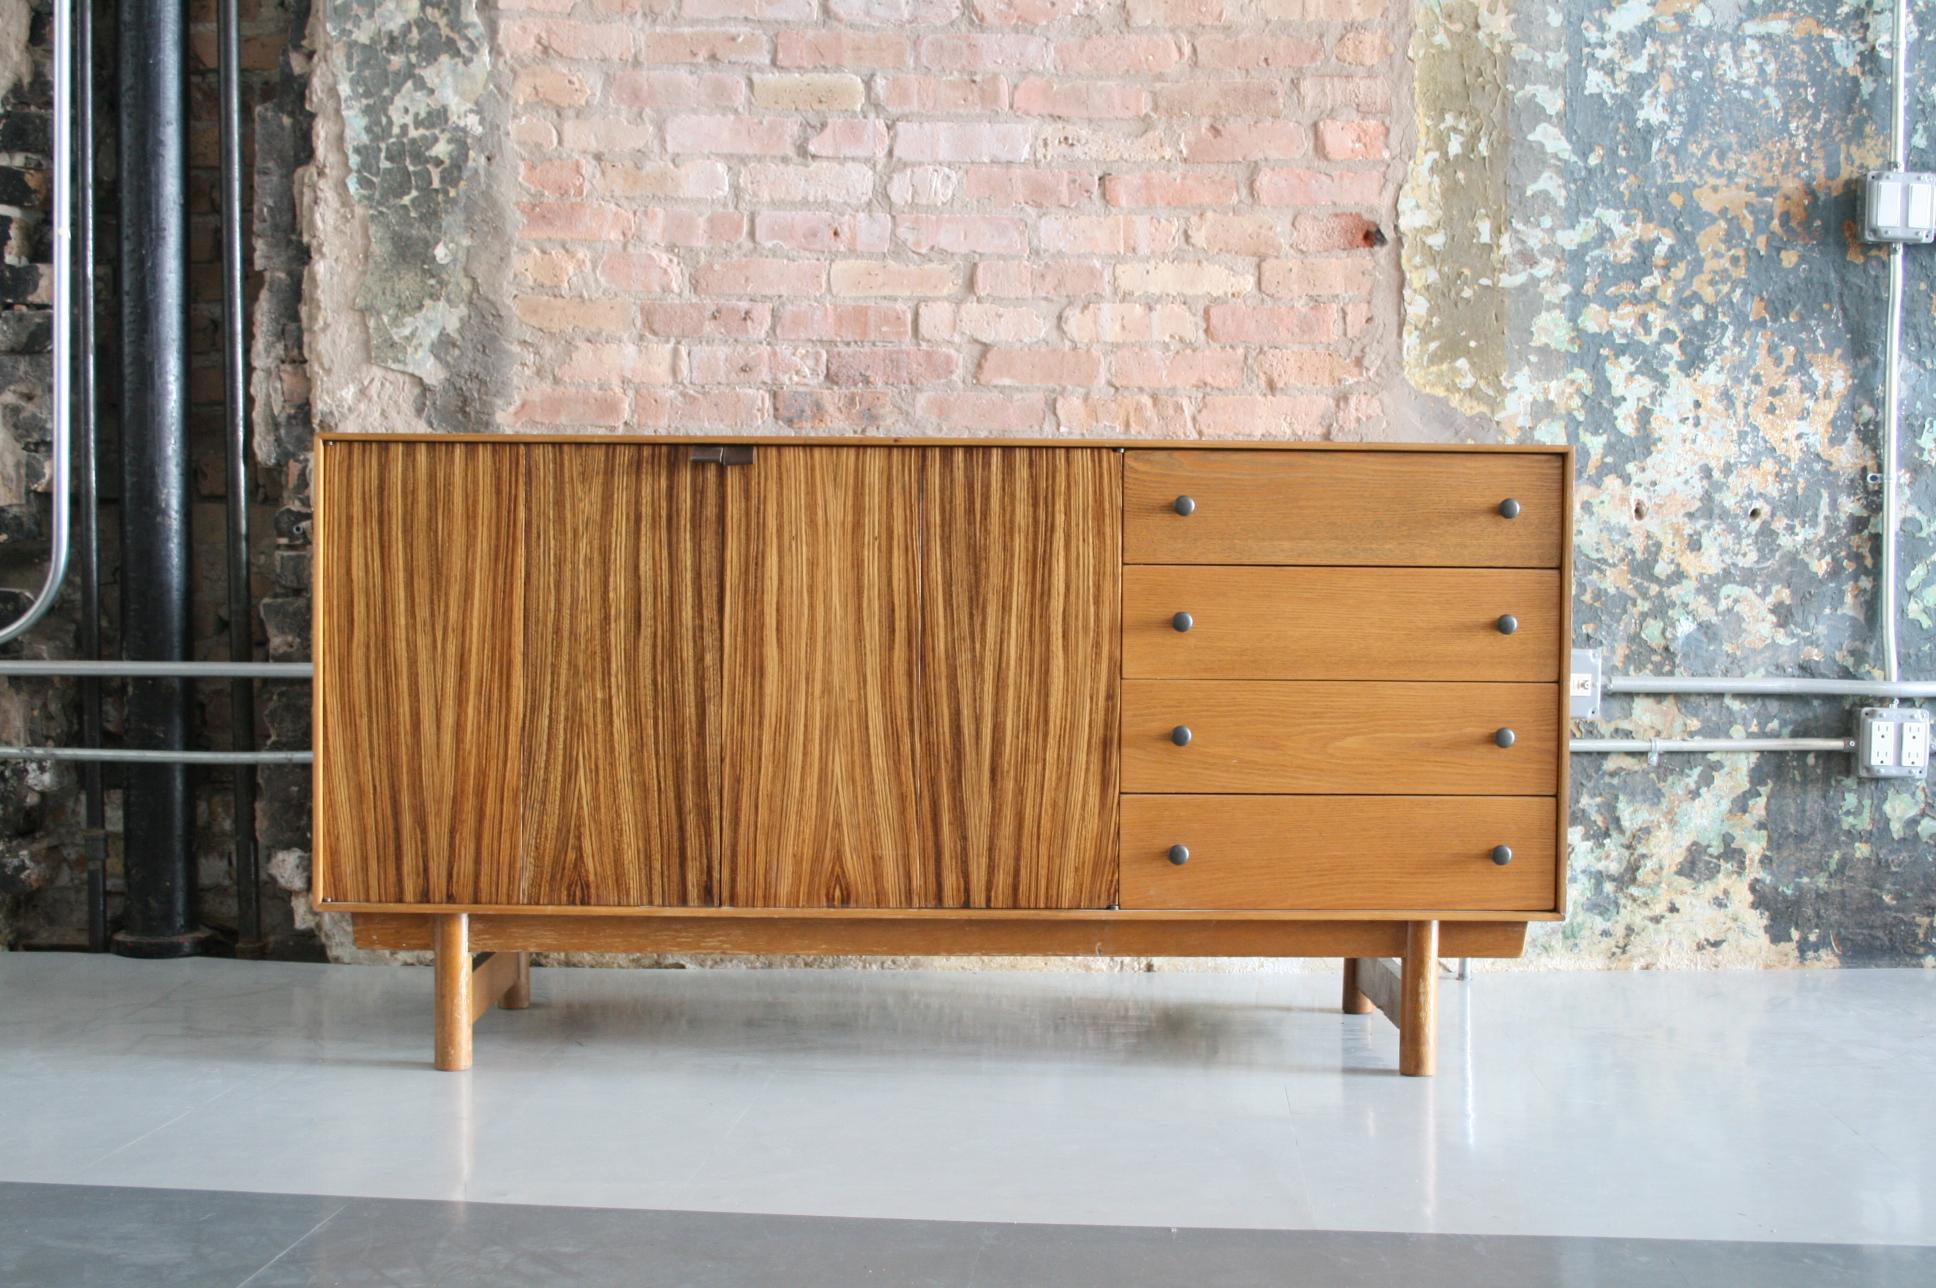 The American designer Lawrence Peabody, trained in Denmark and the Scandinavian influence, was clearly evident in this fabulous credenza. A very Wegner-esque embrace of the natural wood, quality construction, and subtle detailing are stand-out